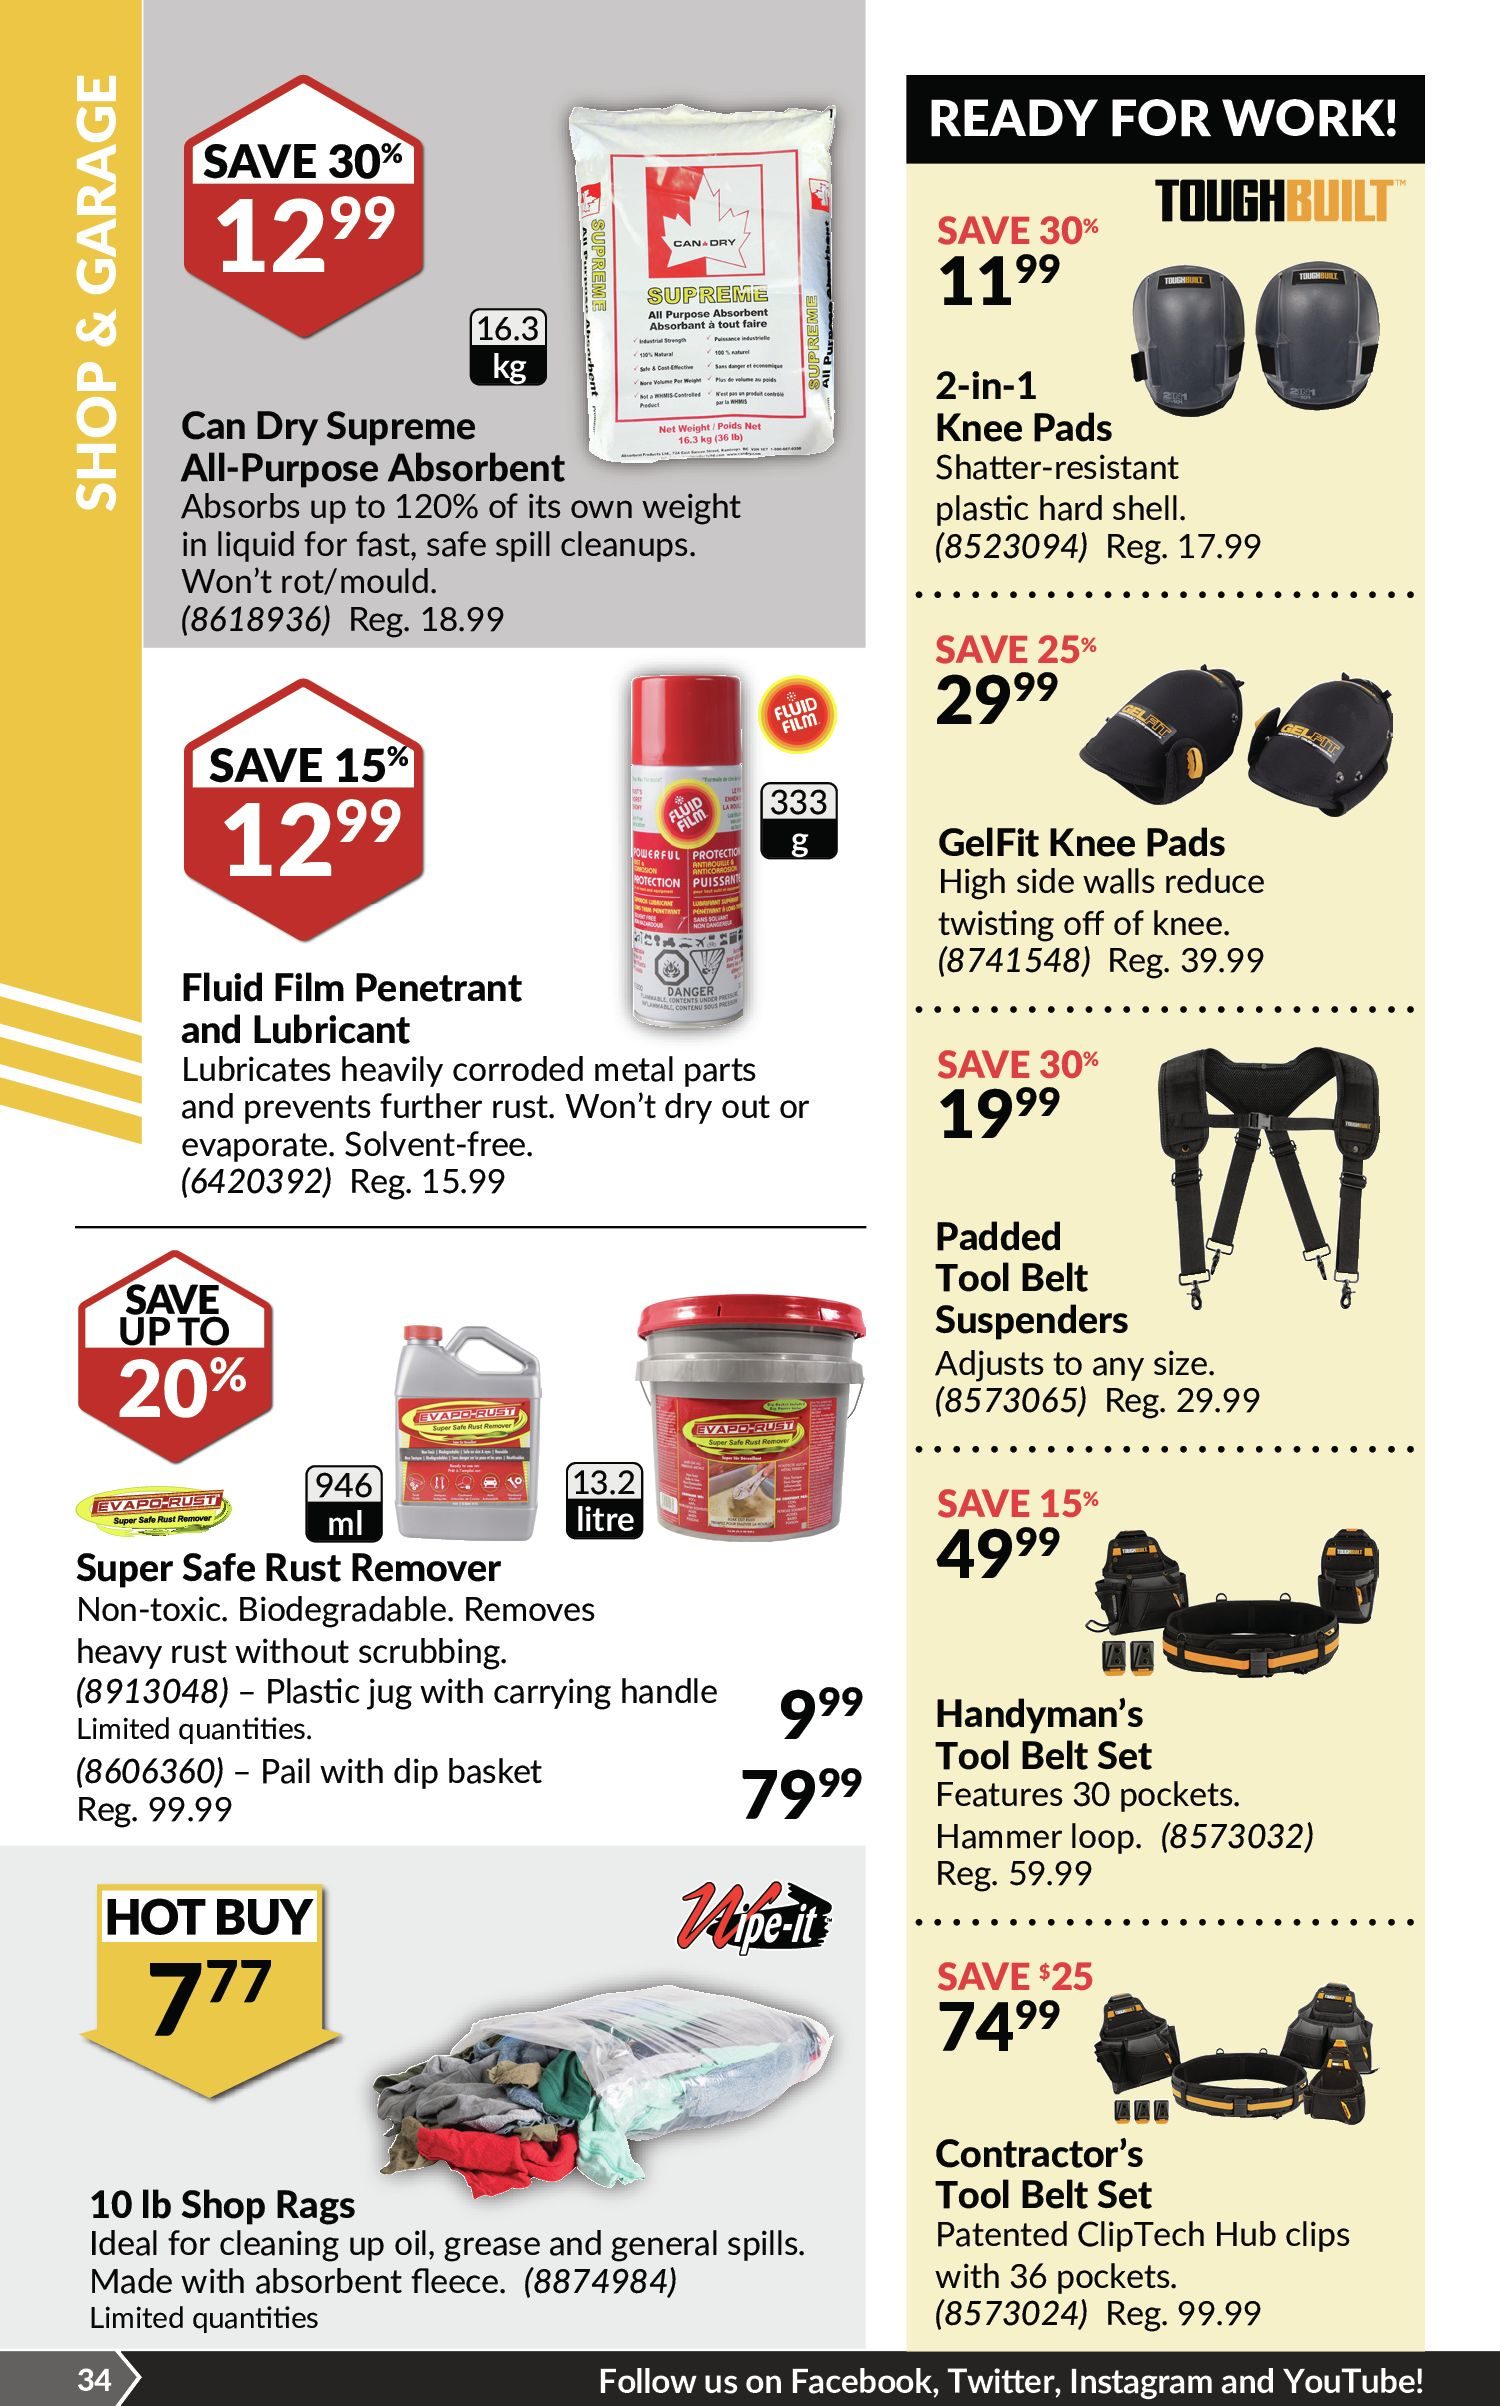 Princess Auto Weekly Flyer - 2 Week Sale - Ready For Summer Projects! - Aug  3 – 15 